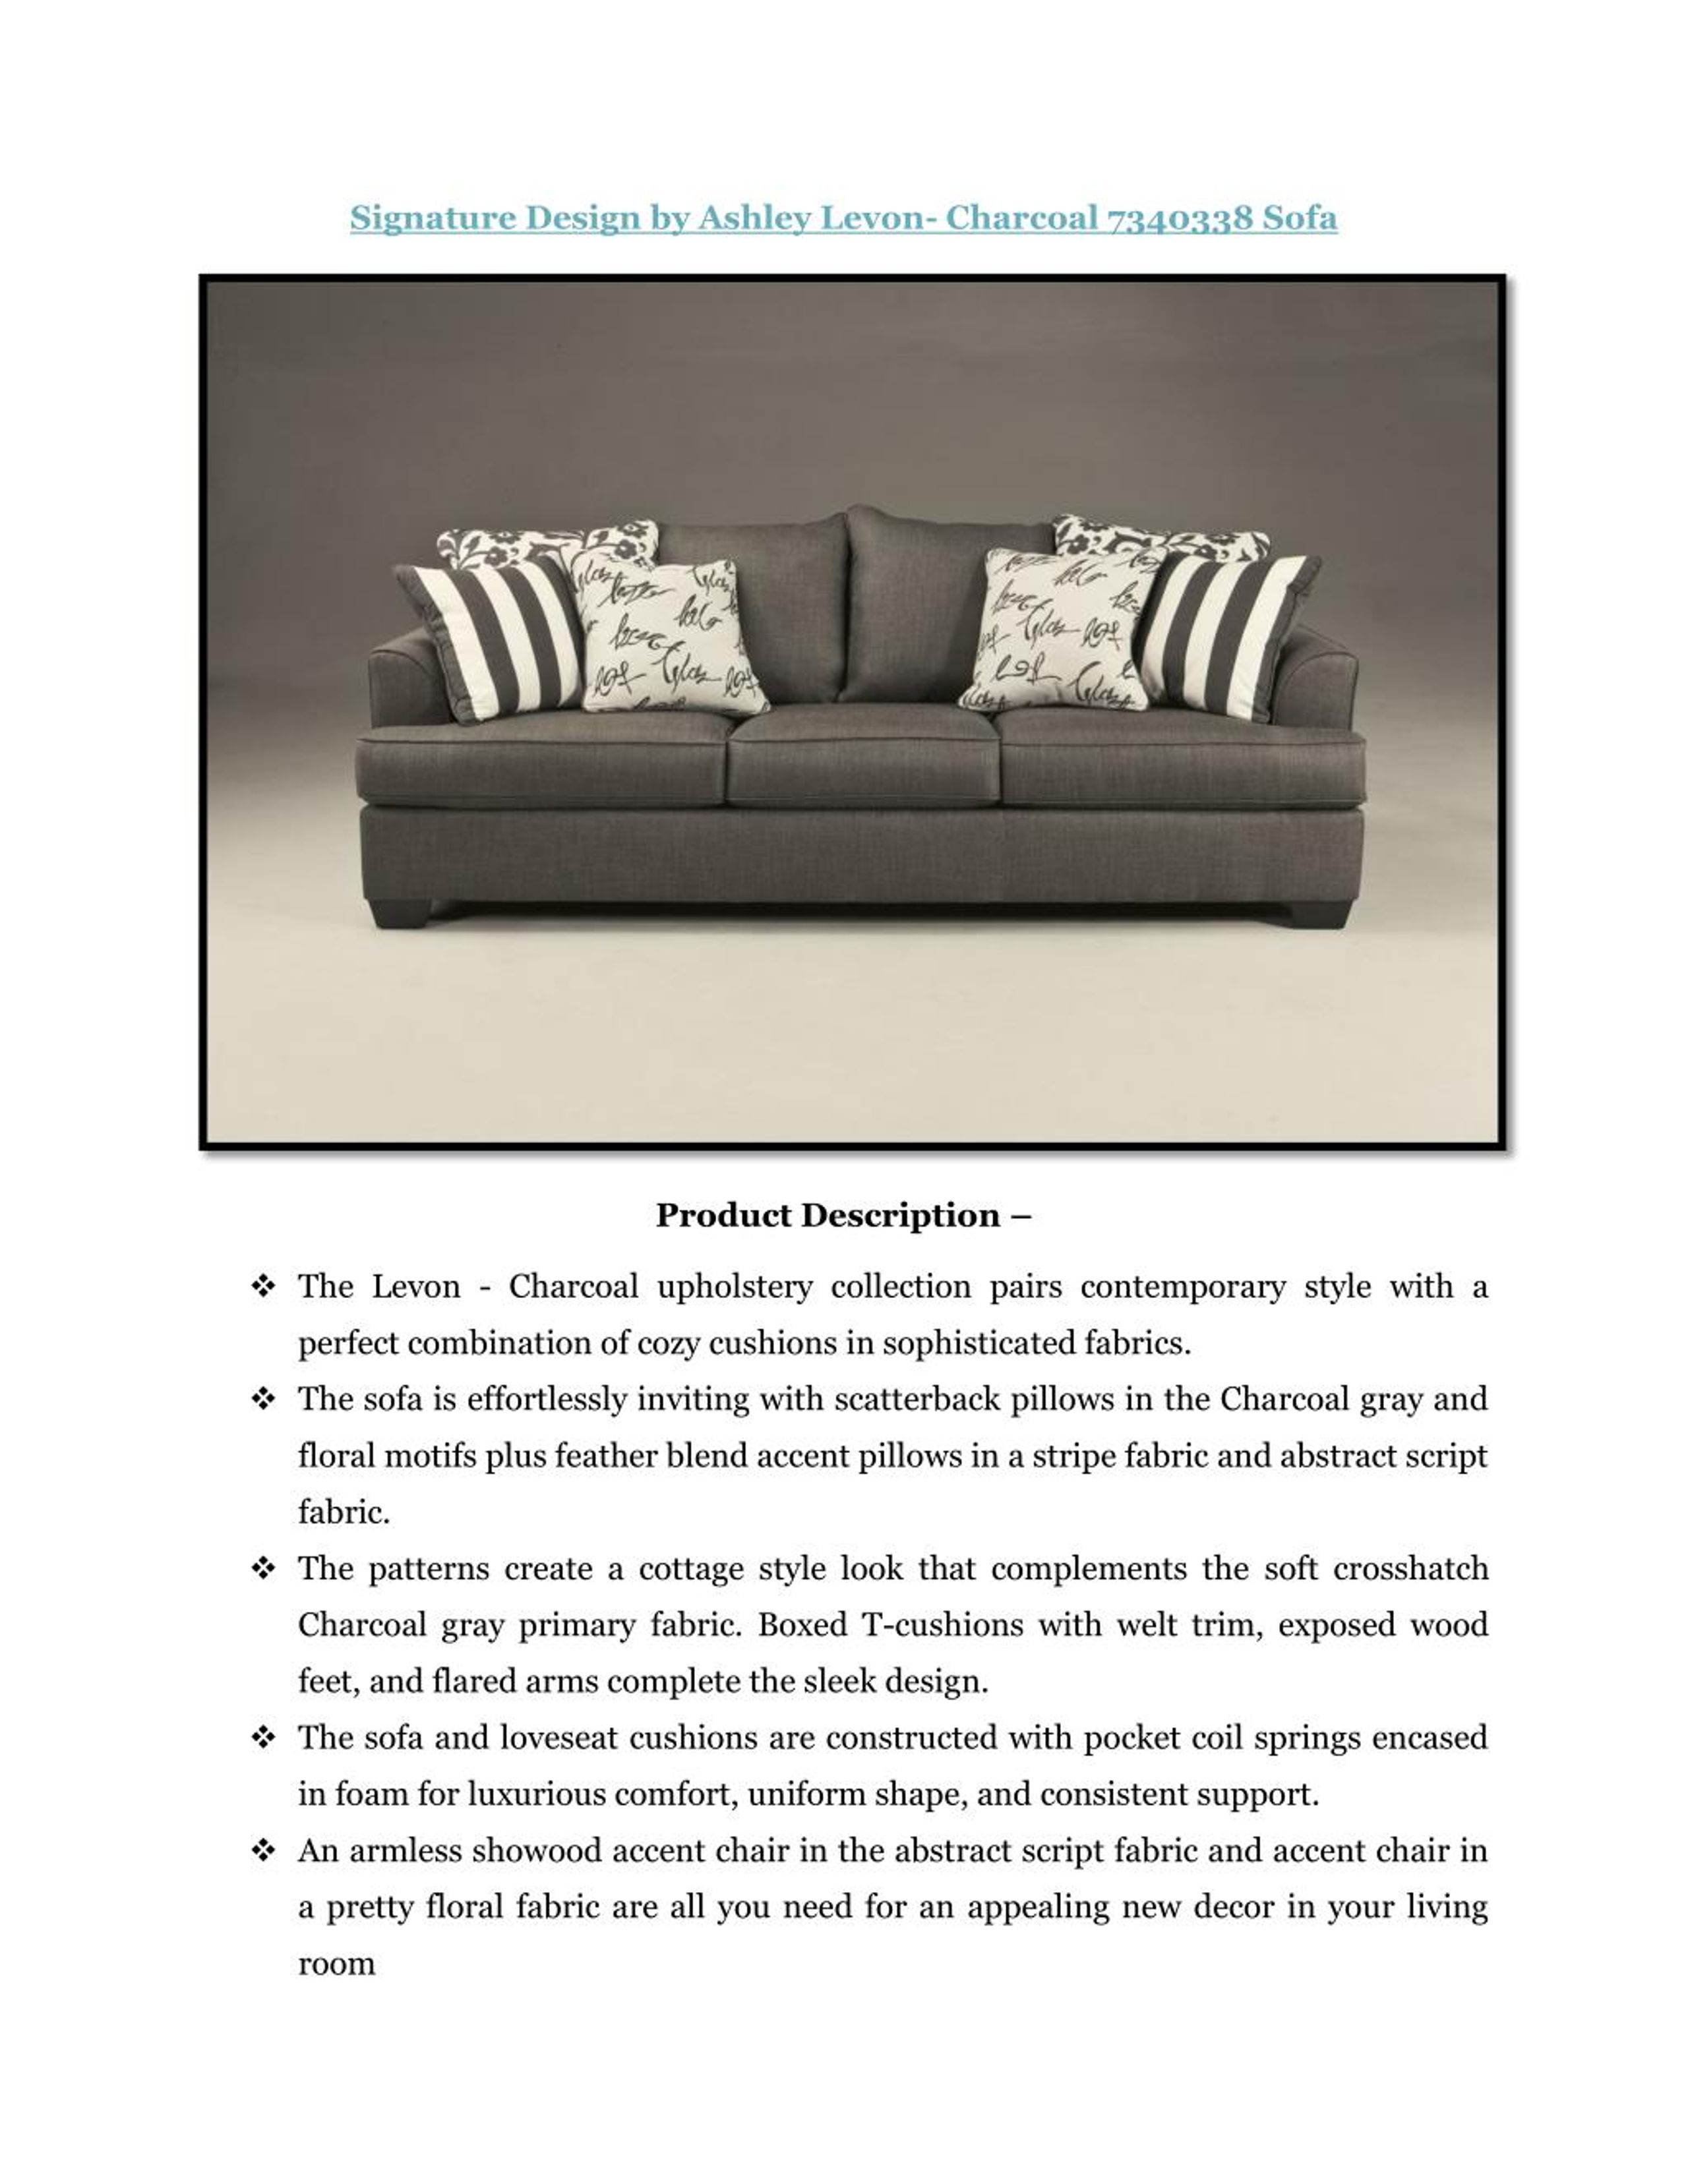 PPT - Unique Designs of Living Room Furniture and Arrangement Mistakes ...